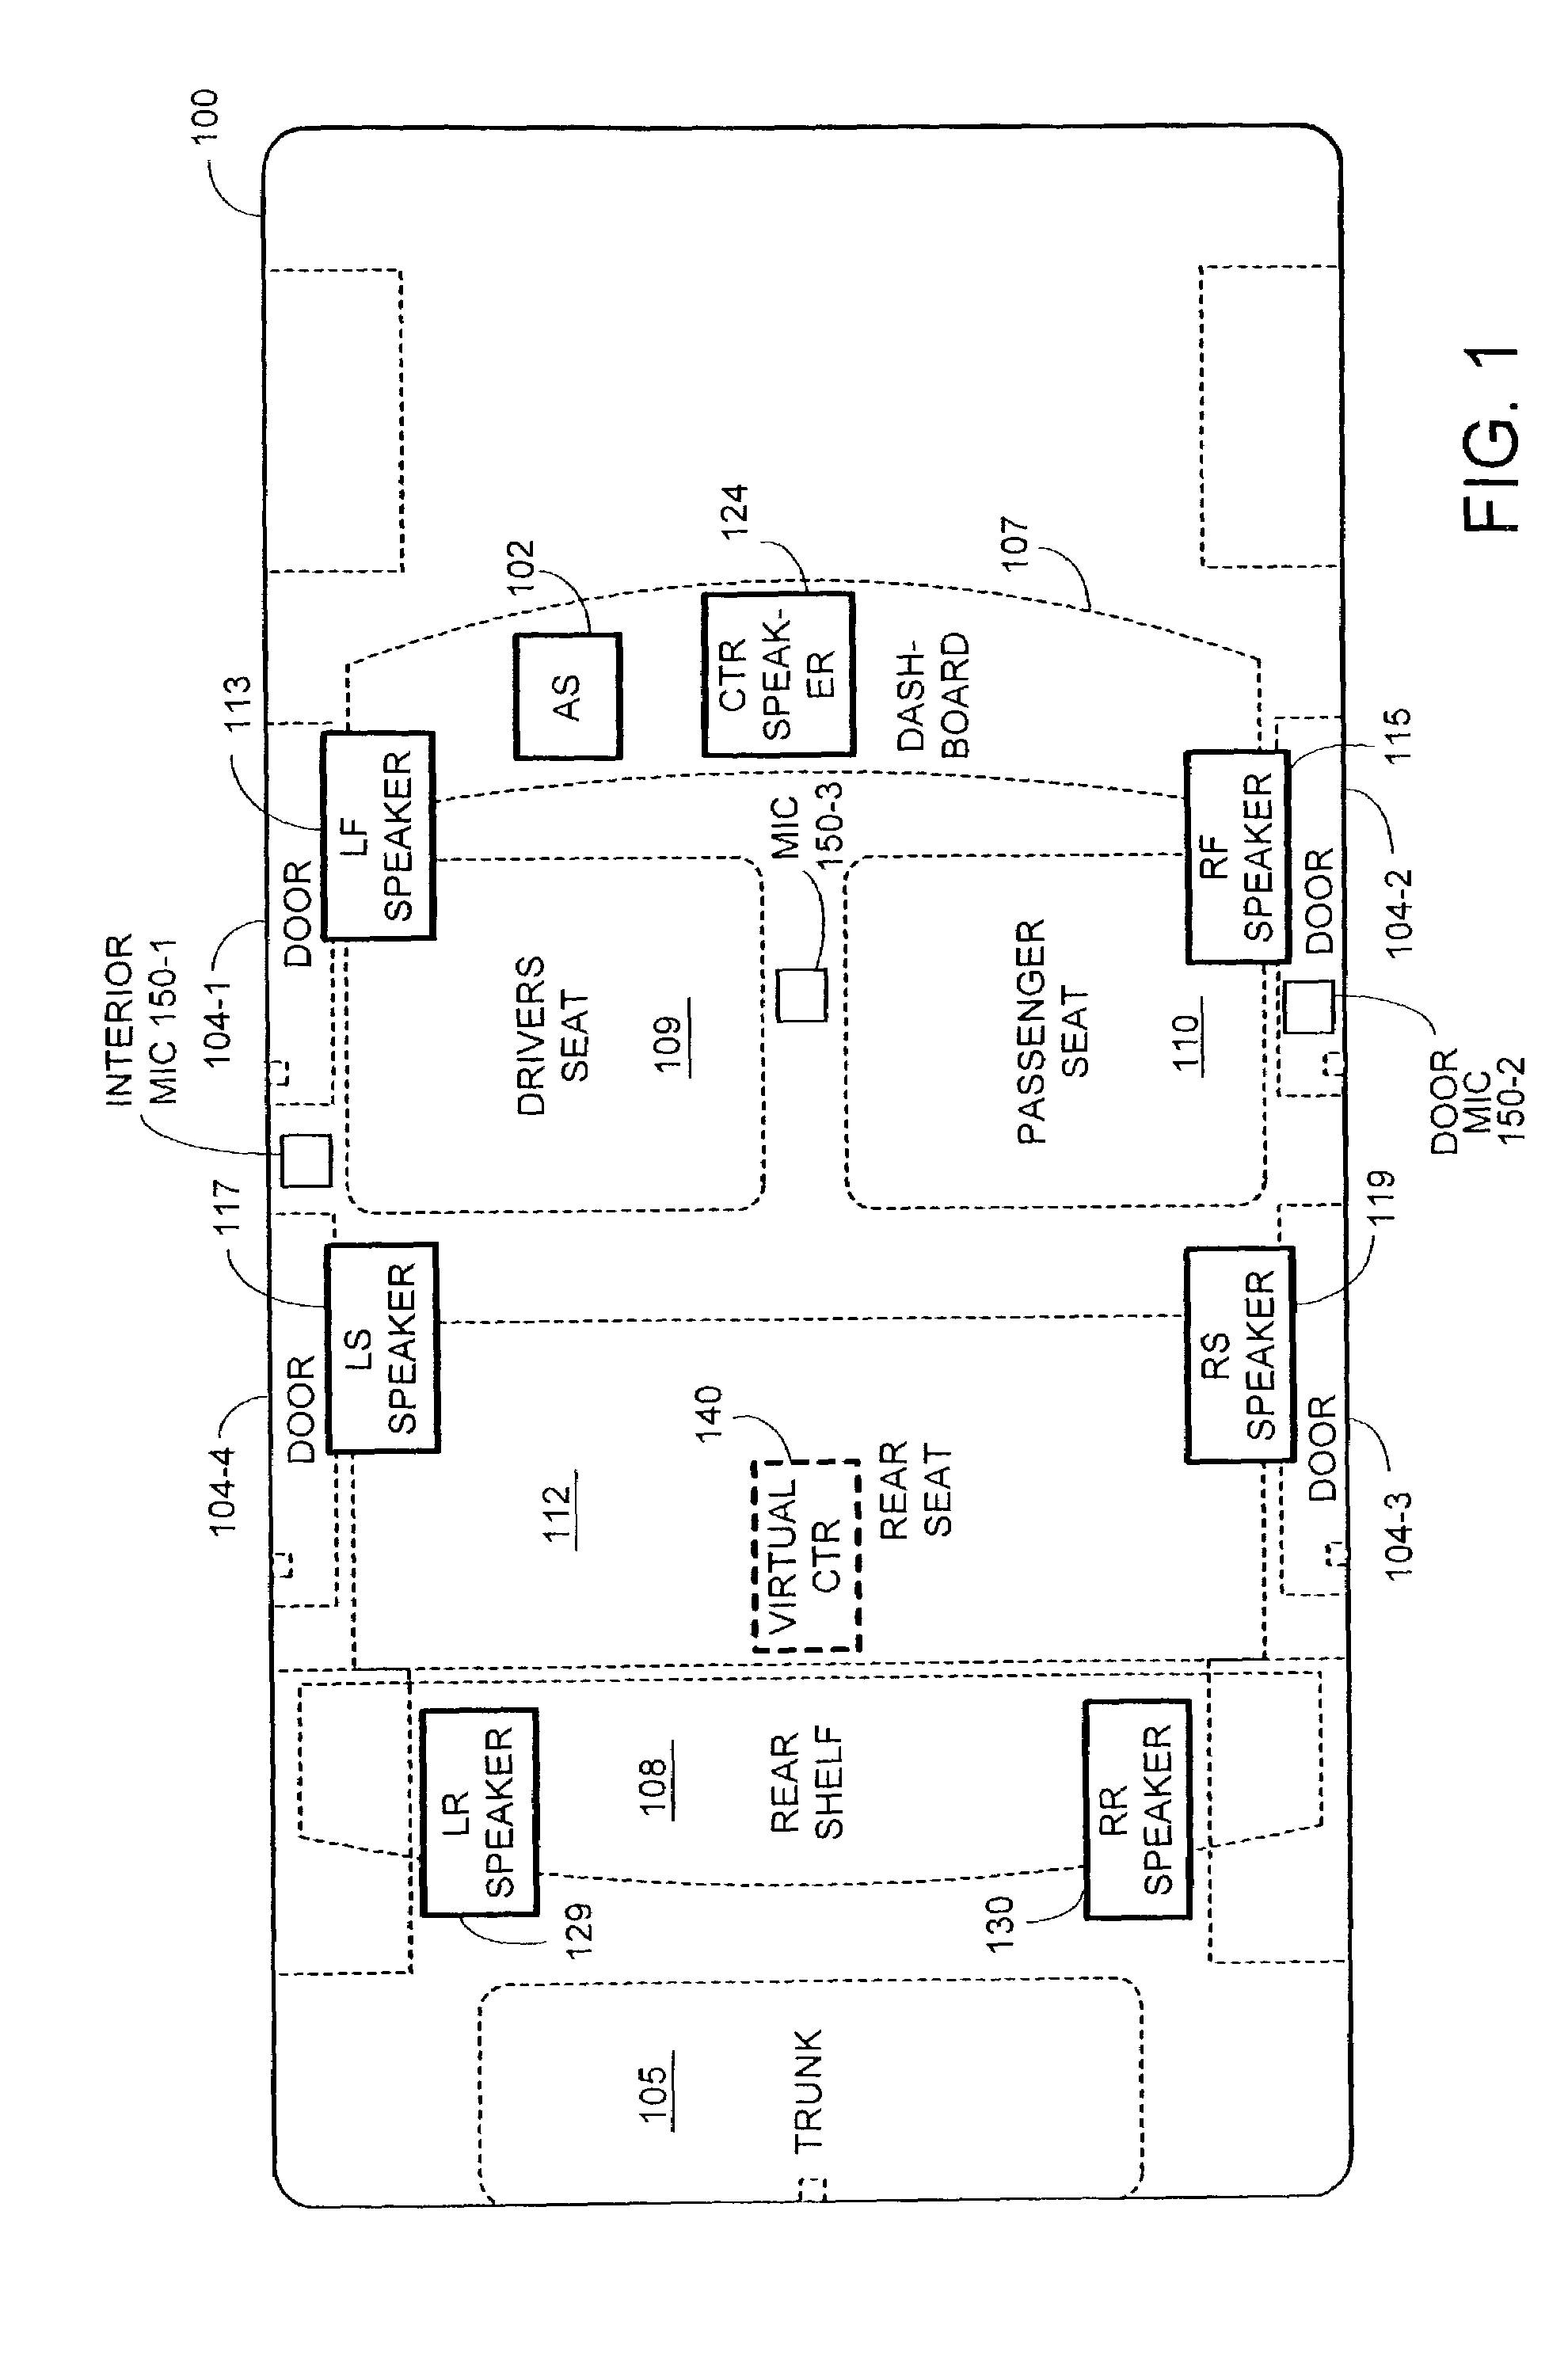 Sound processing system with degraded signal optimization